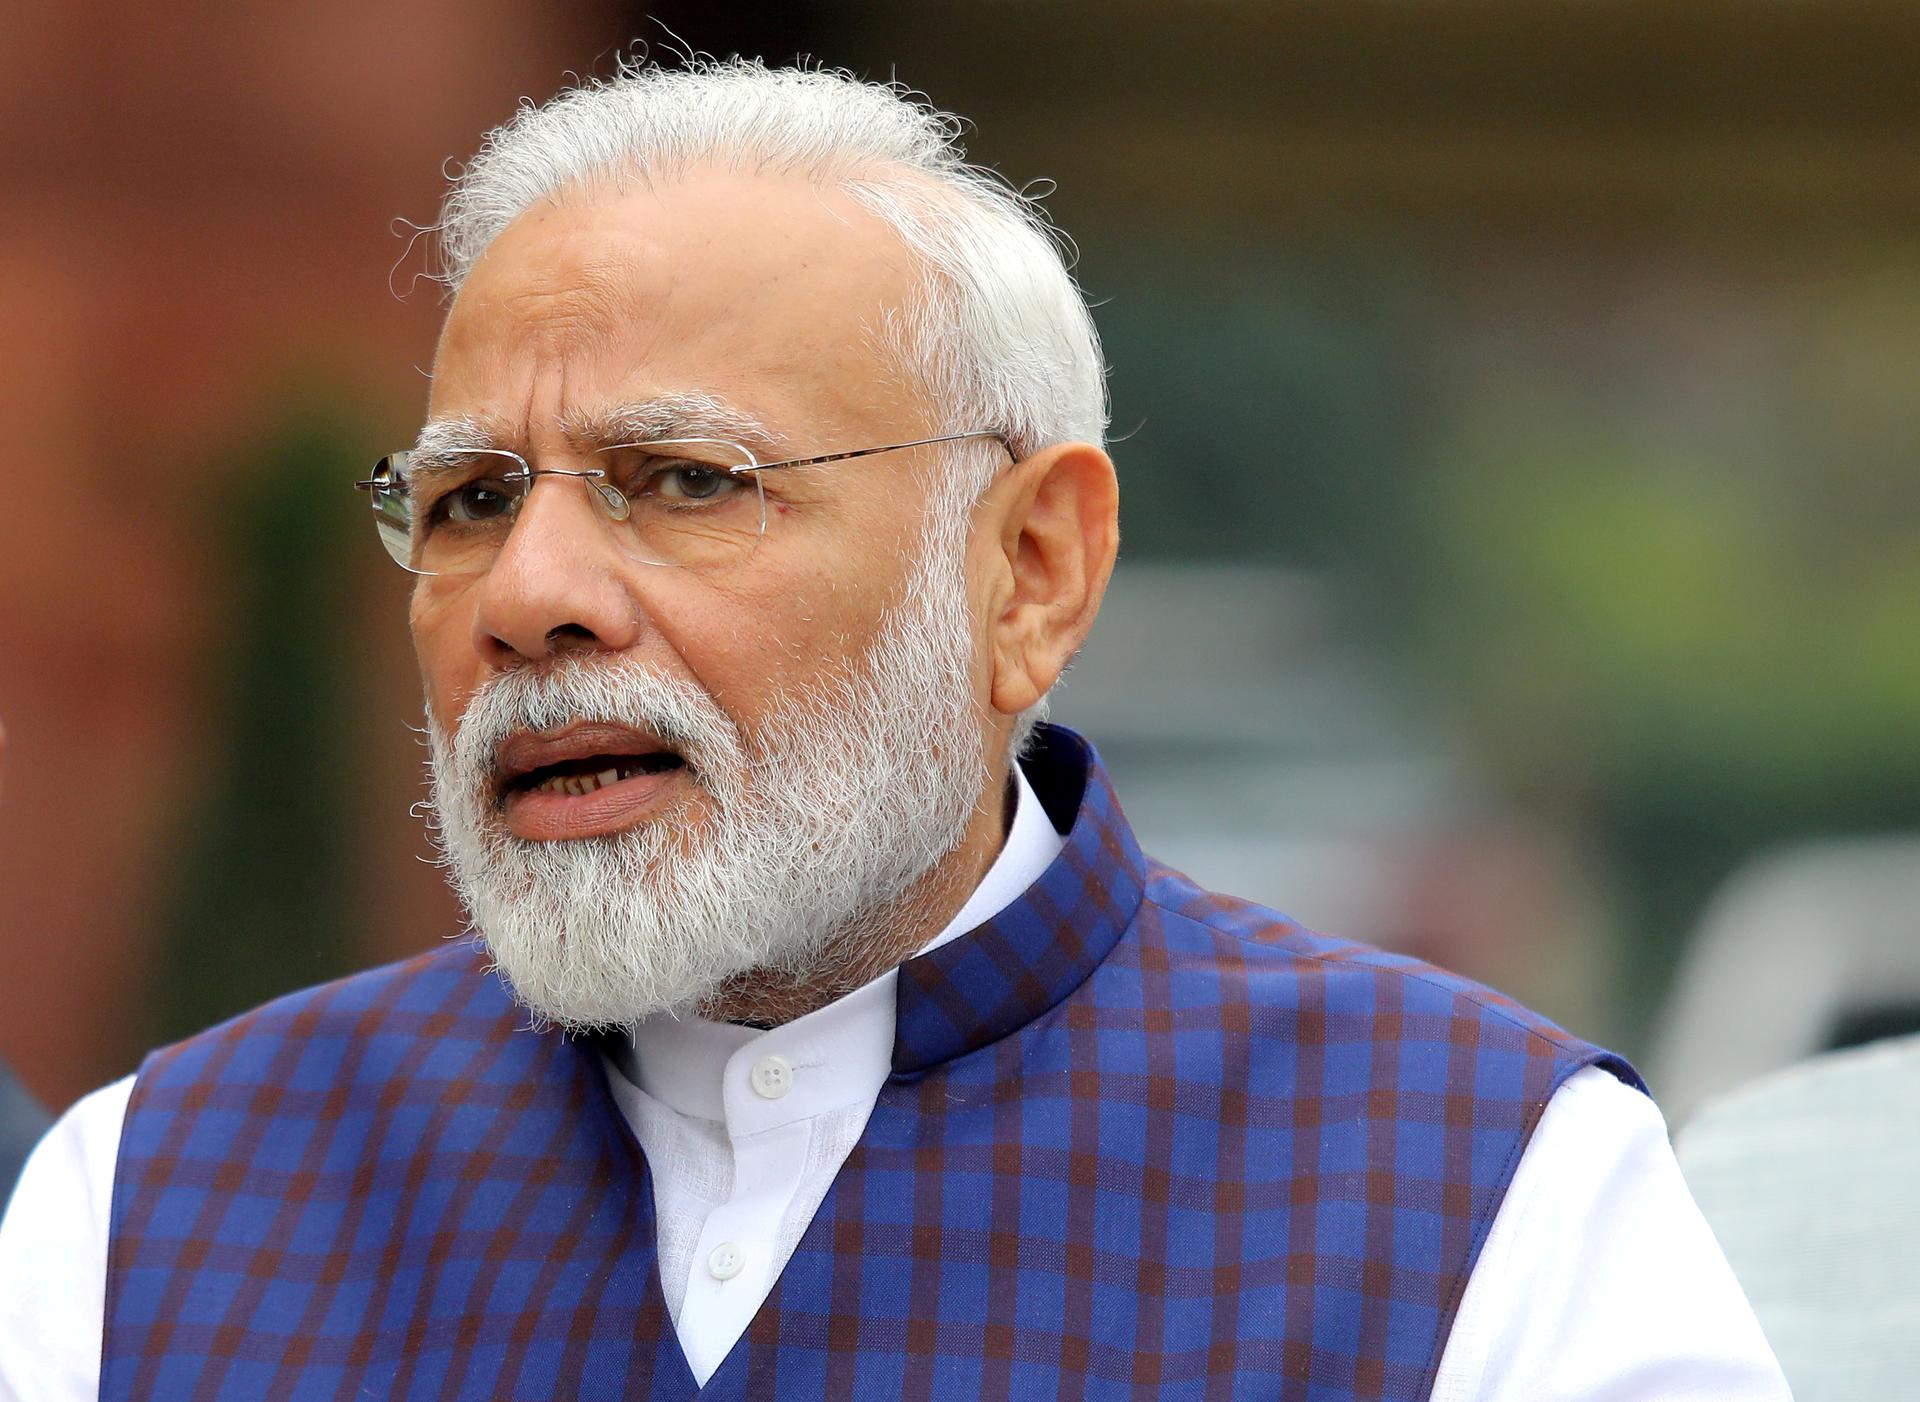 Twitter confirms account of India PM Modi's personal website hacked